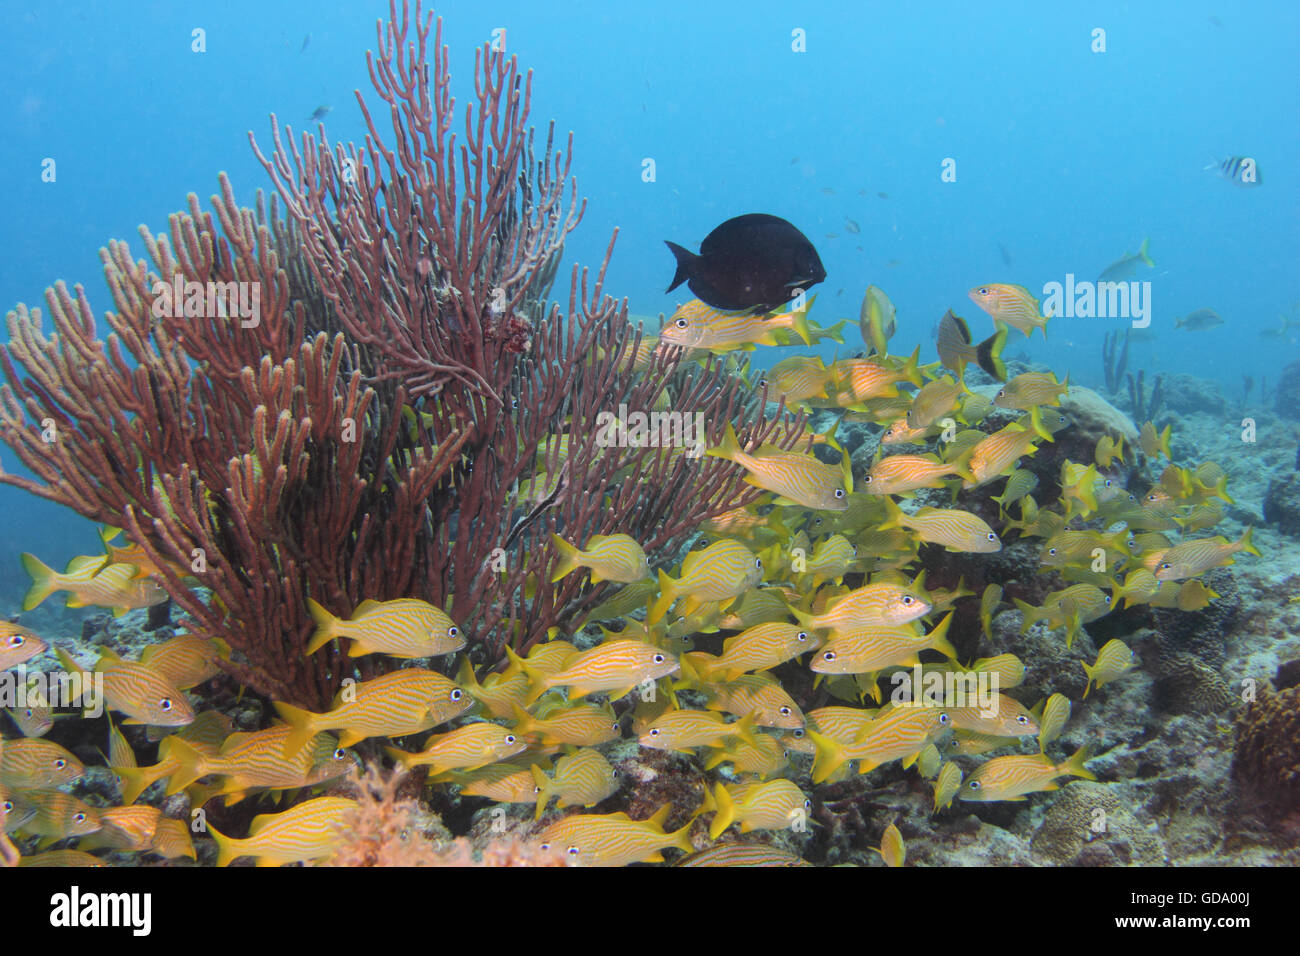 A school of fish on a tropical reef / shipwreck off of the Caribbean island of Aruba. Stock Photo